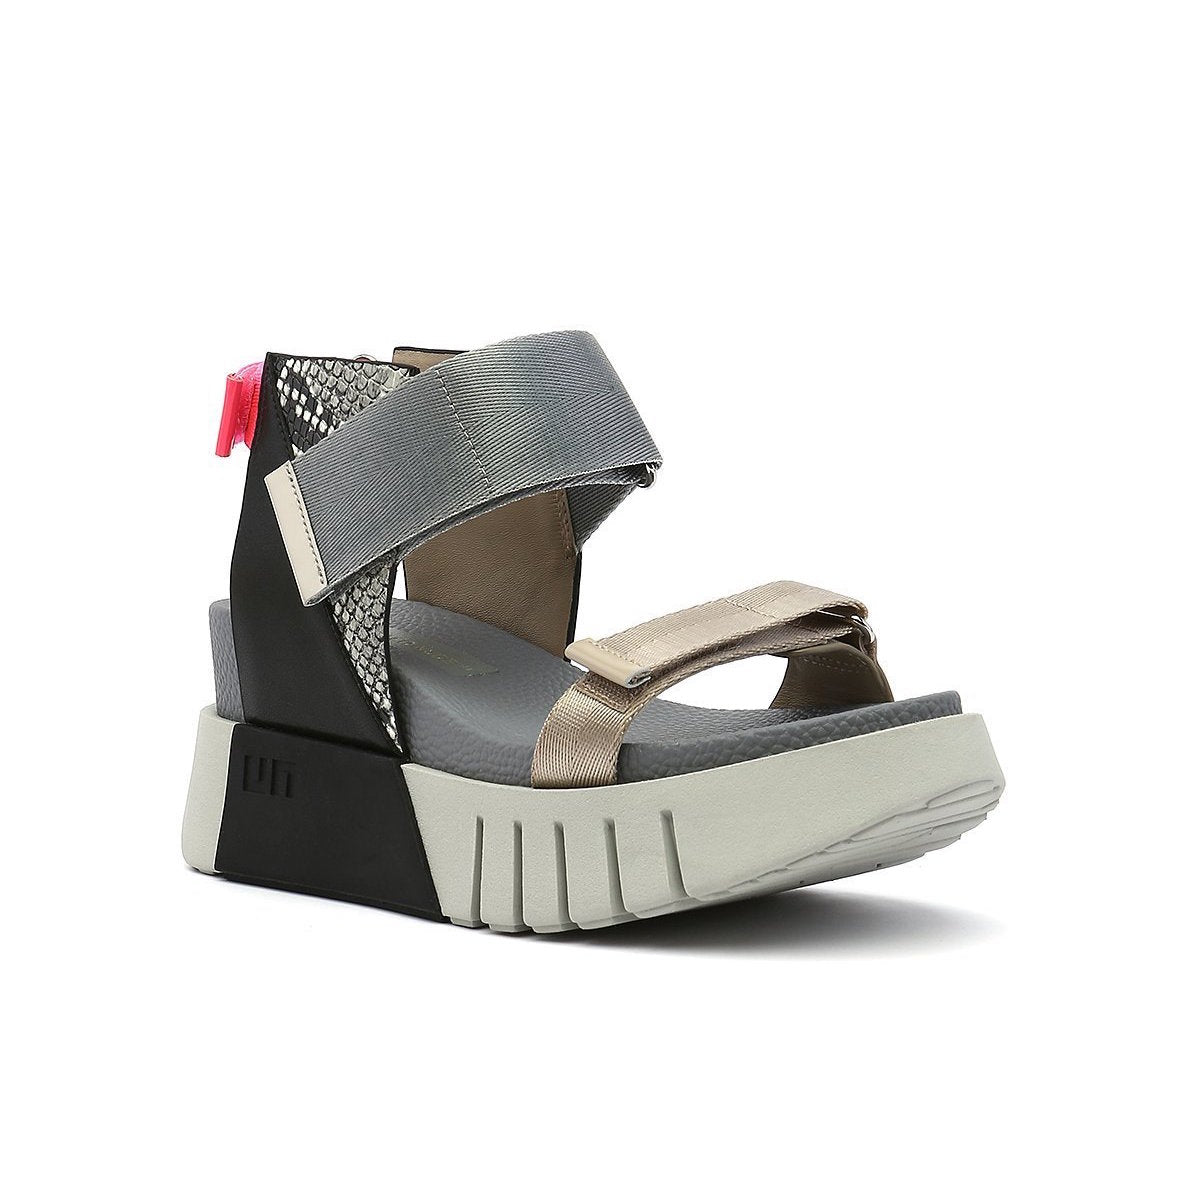 Outer front view of the united nude delta run sandal. This sandal is grey with gold, black, snake print, and a touch of hot pink. The sandal has a white platform sole and adjustable back, ankle, and toe bed straps.